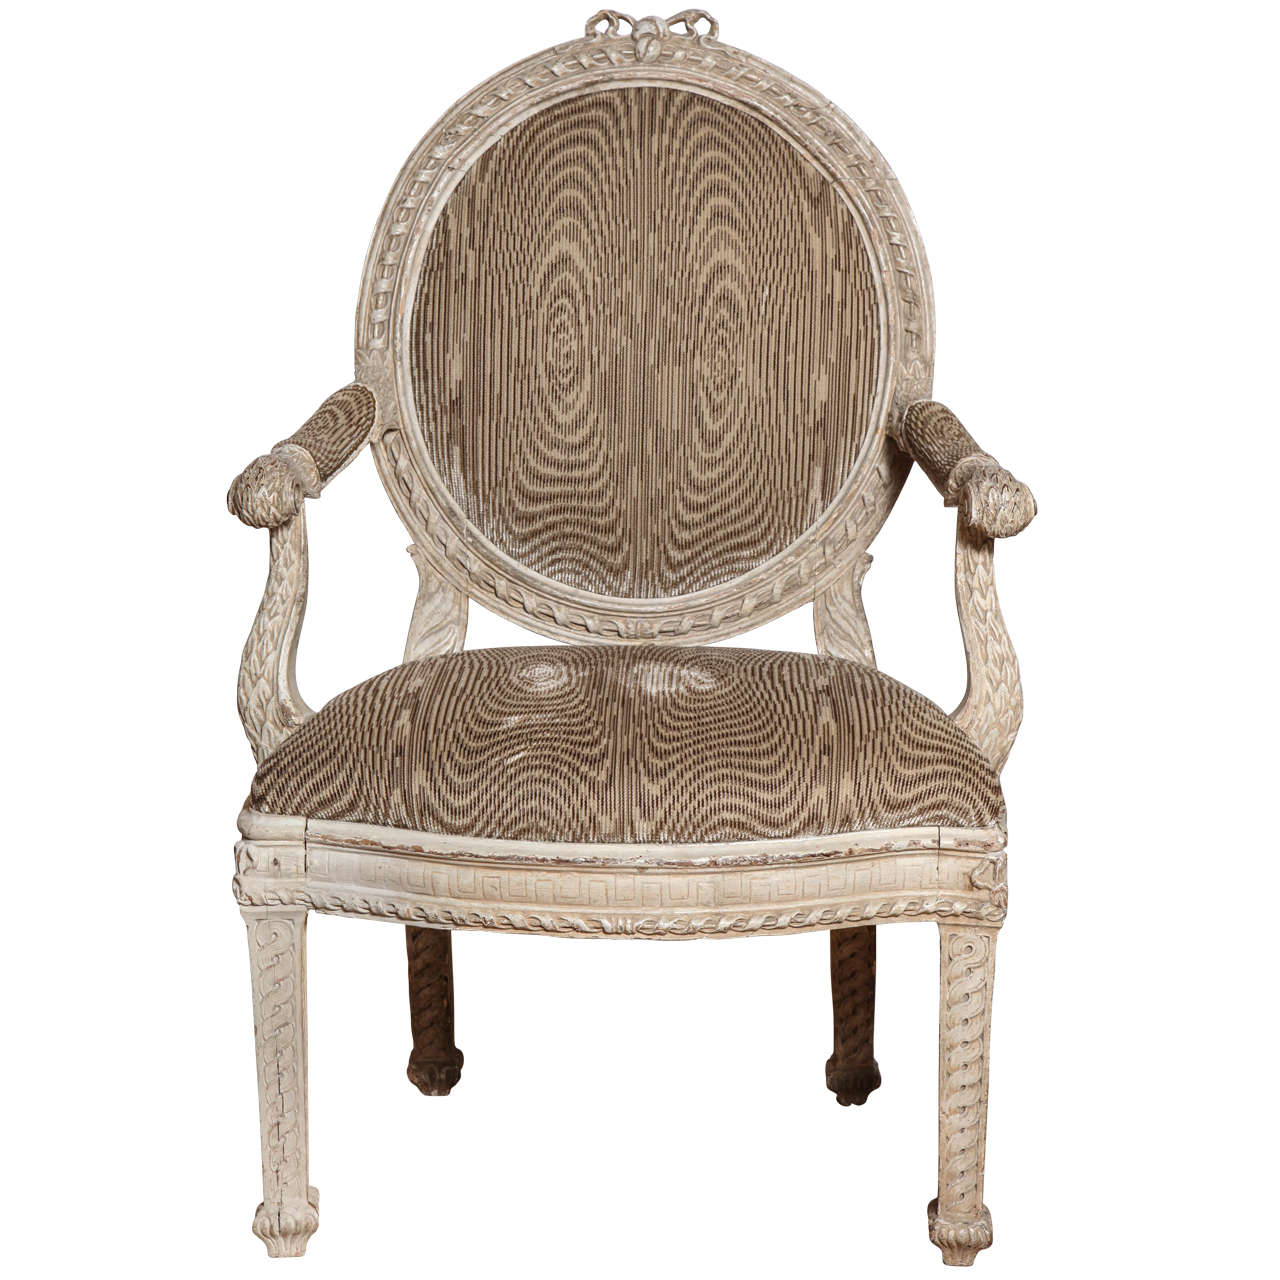 Carved and Painted Neo-Classical Fauteuil, Italian, 18th Century For Sale